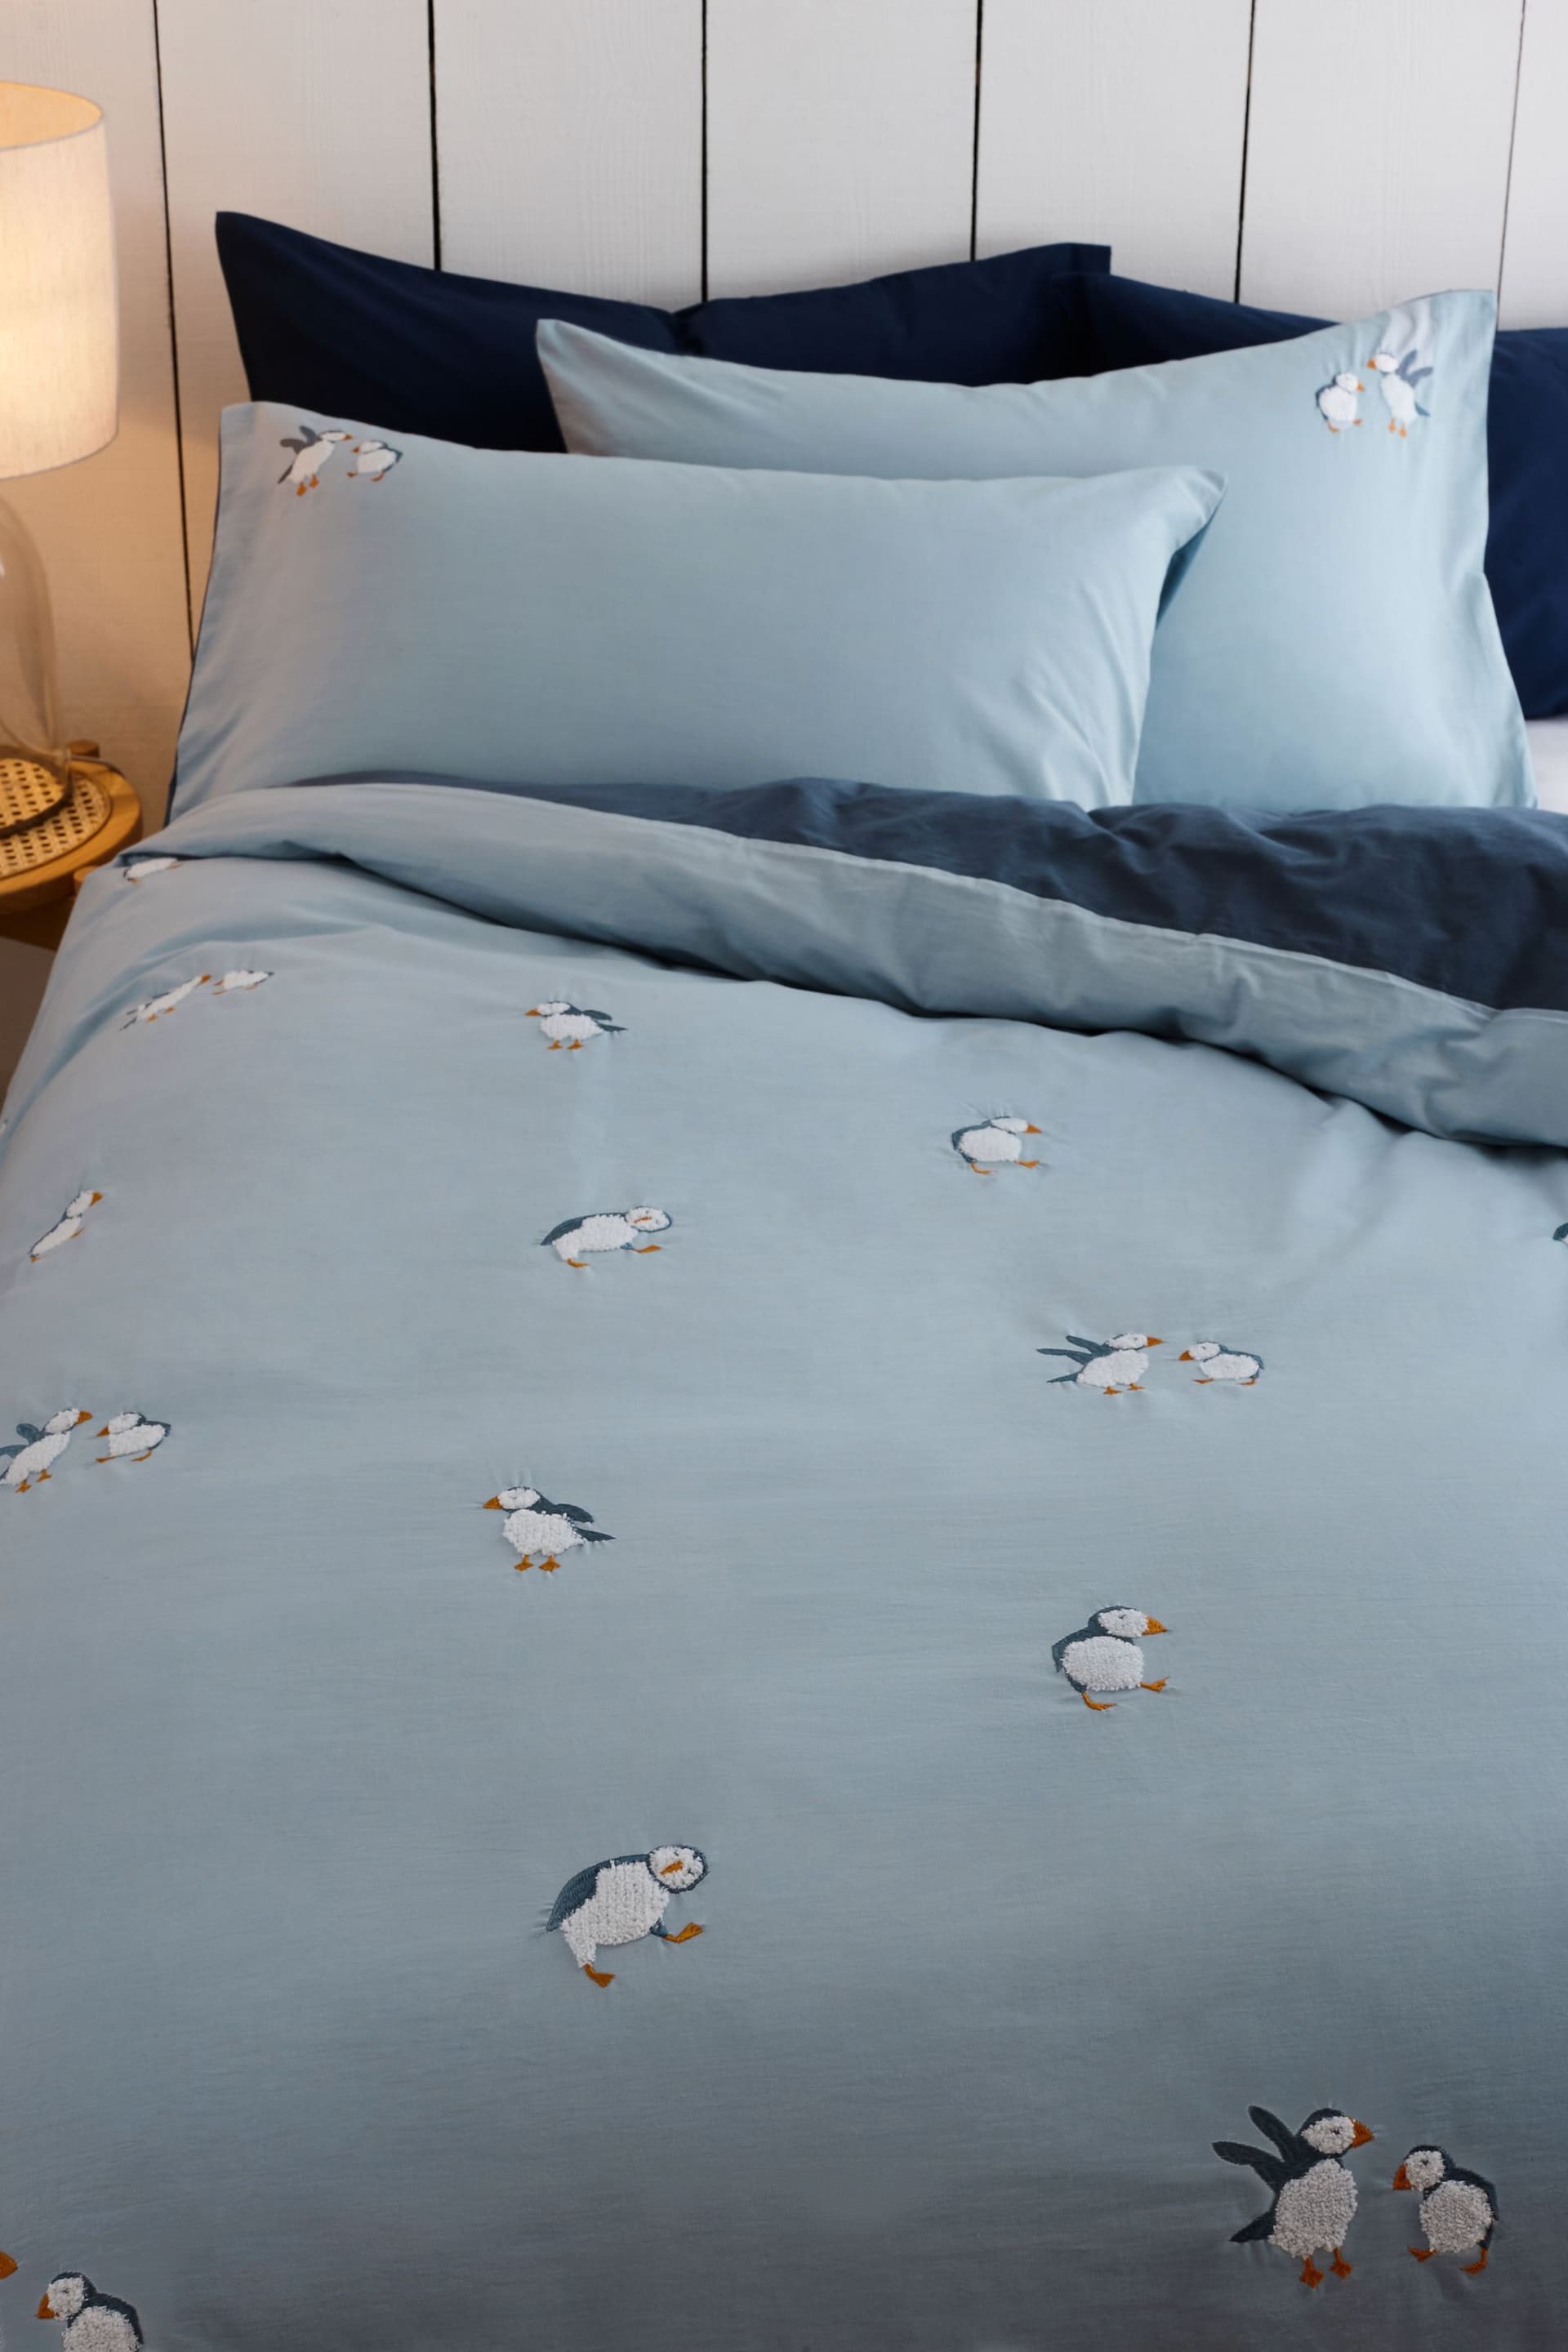 Blue Tufted Puffin Duvet Cover and Pillowcase Set - Image 2 of 5